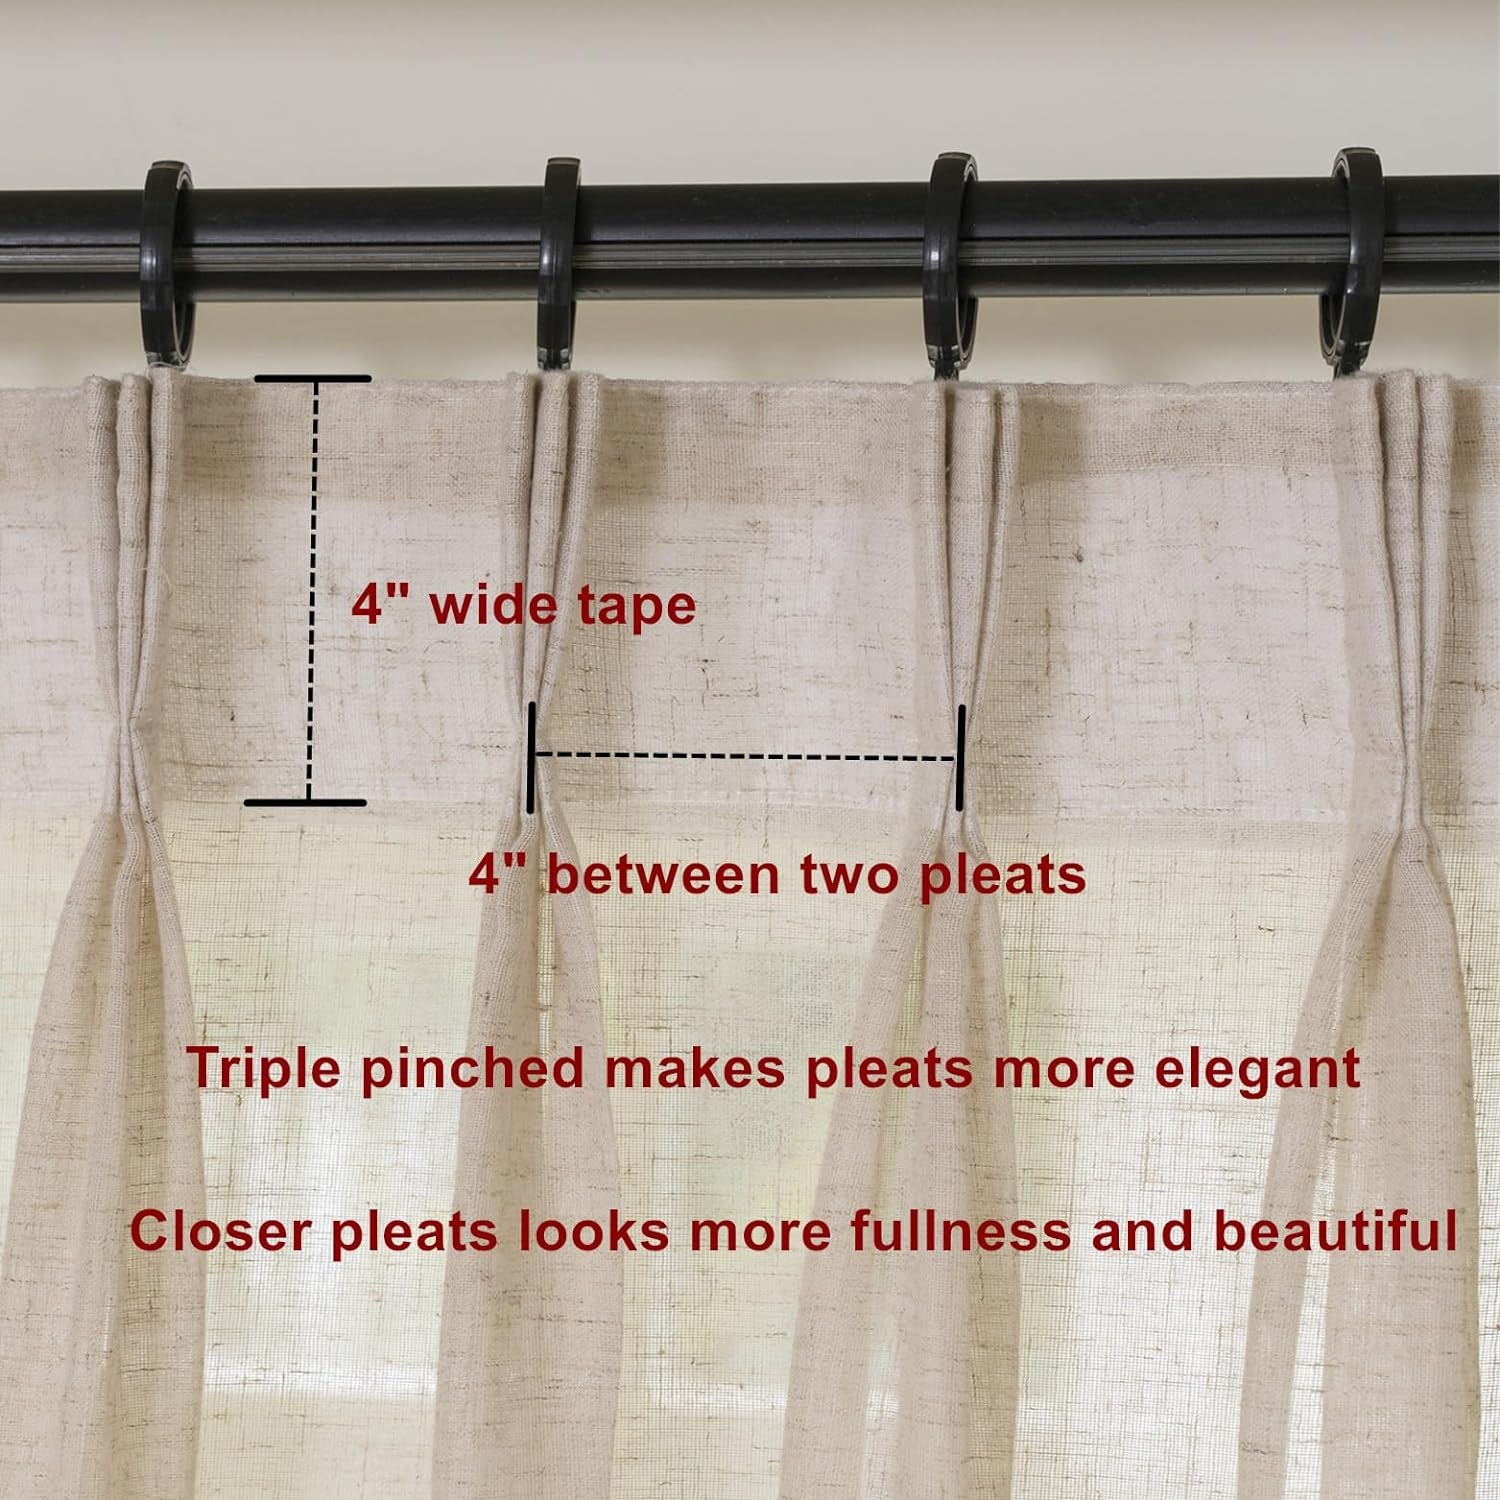 Faux Linen like Triple Pinch Pleated French Pleats 54 Inches Long Sheer Curtains Window Treatment Voile Fabric Drapes Living Room Kitchen (Linen Colour, 36W X 54L (2 Panels))  SL   